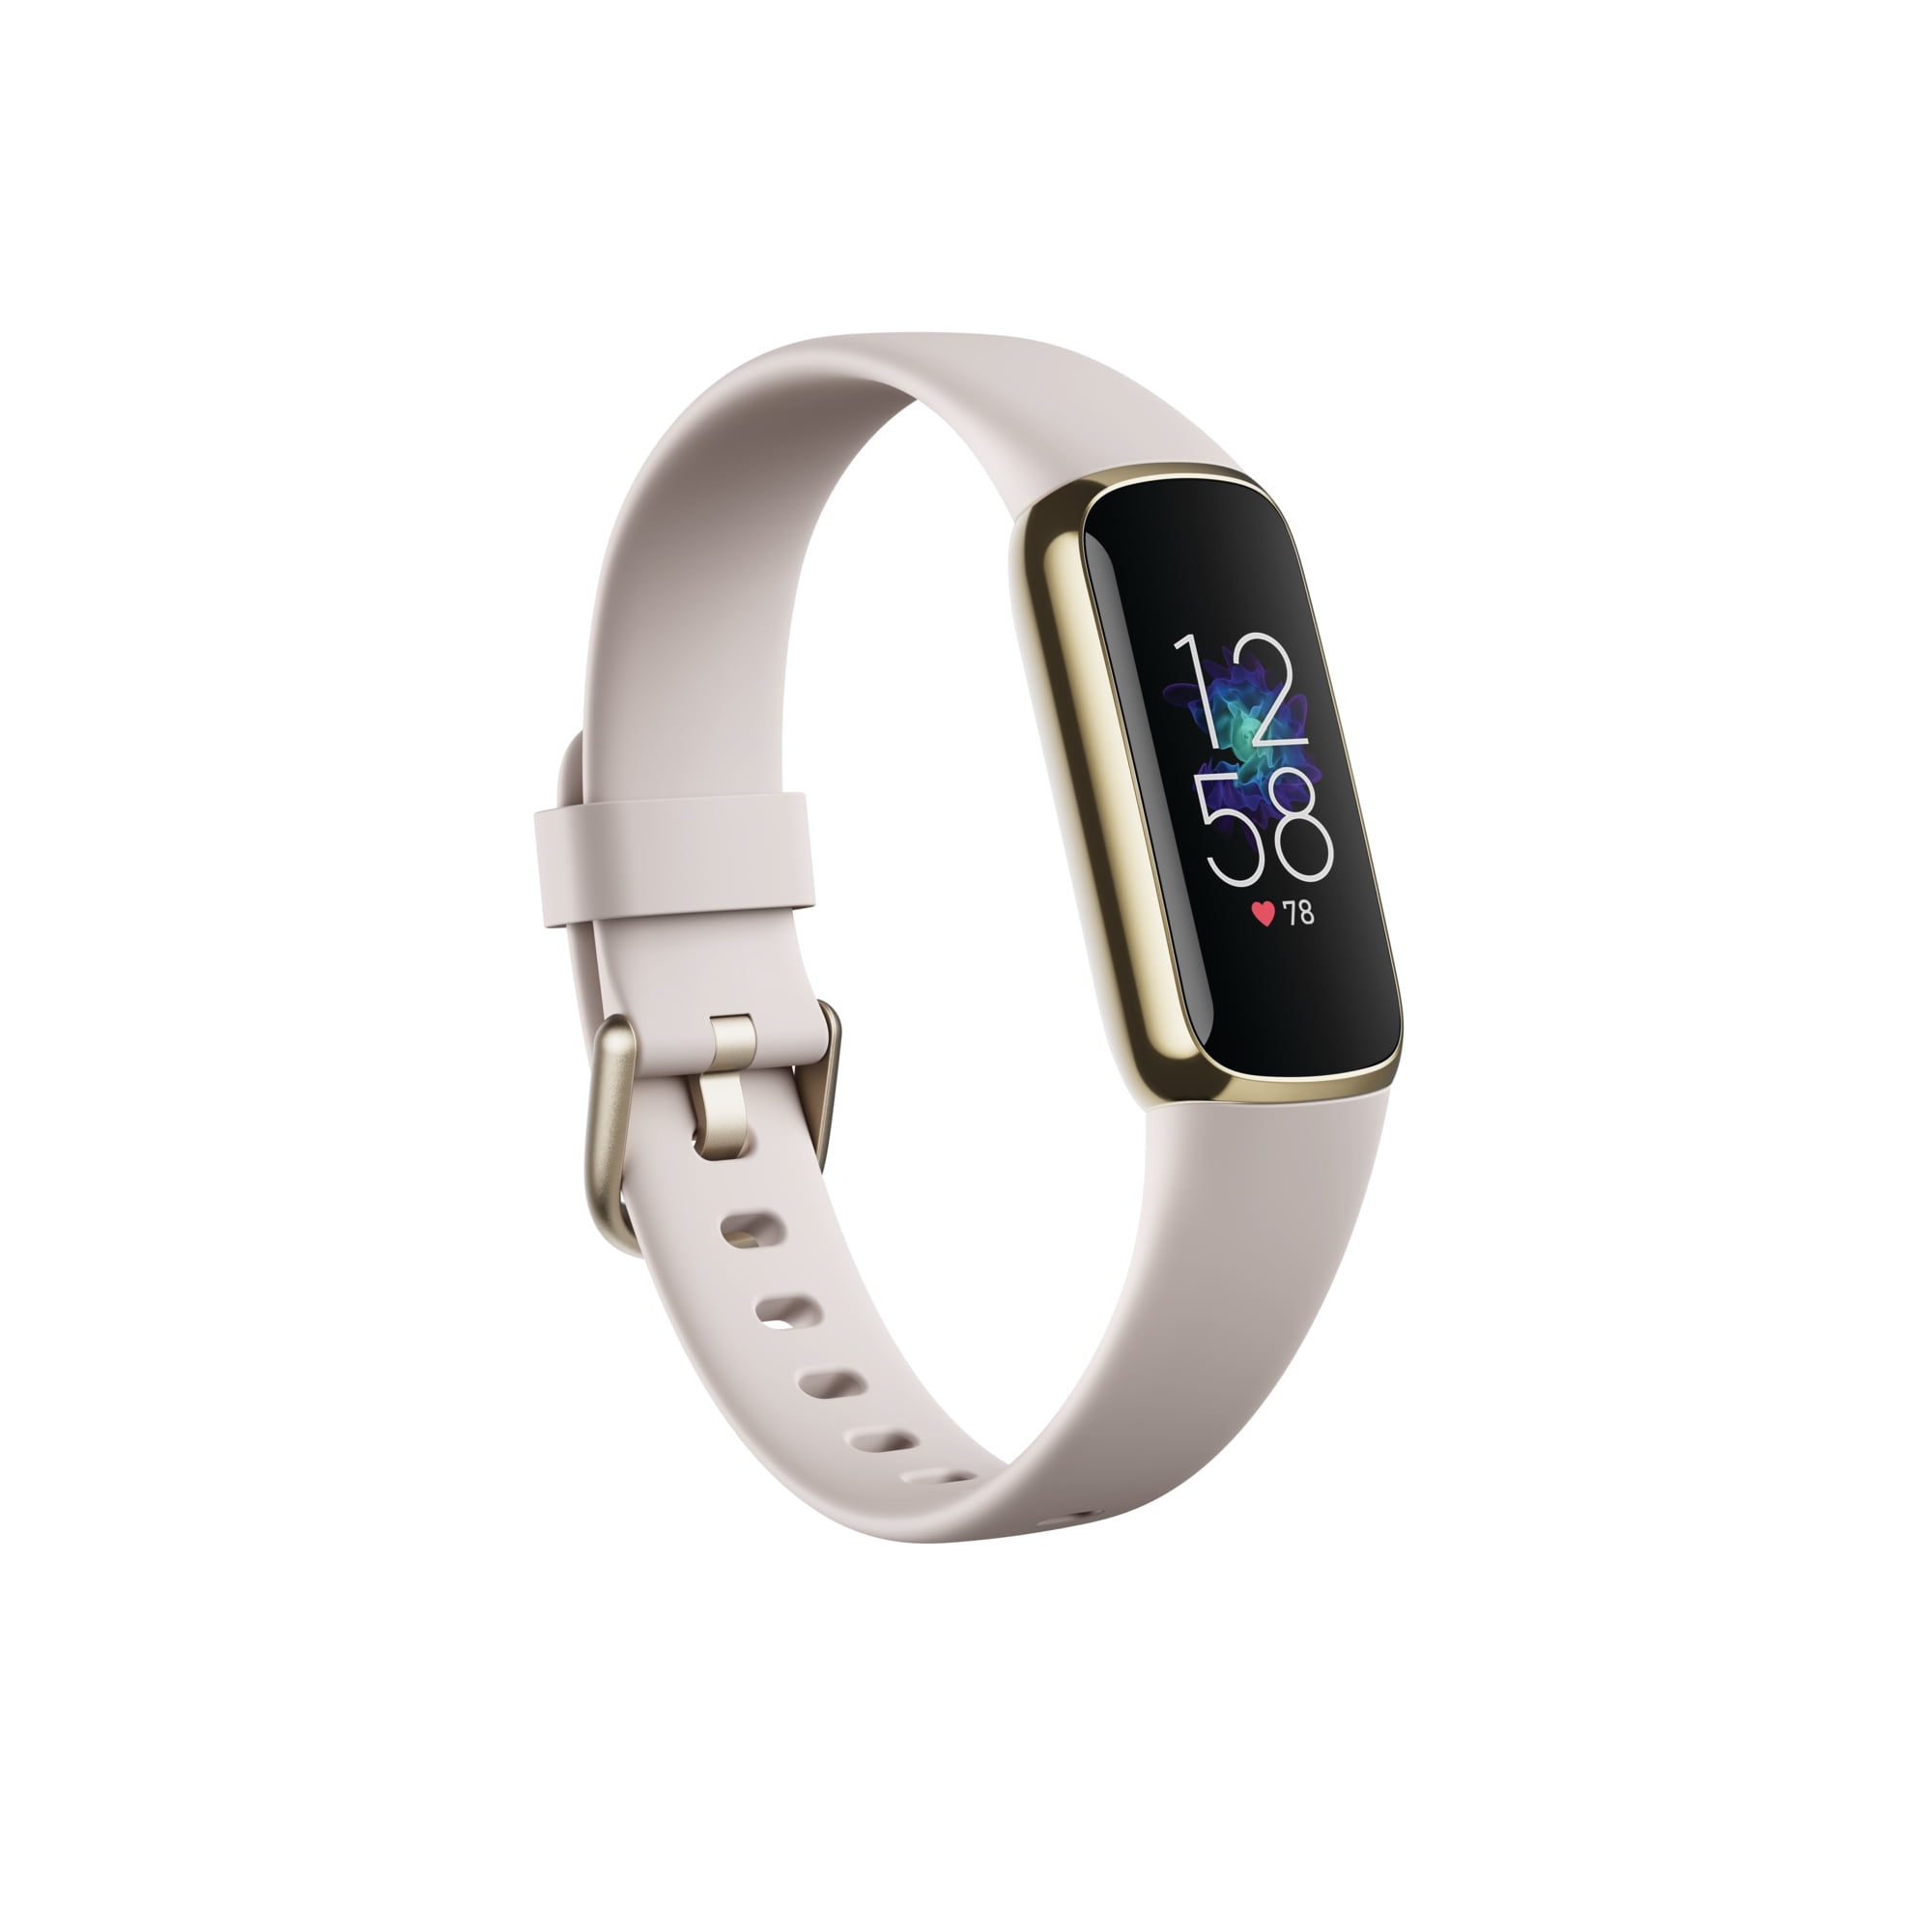 Fitbit Luxe Fitness & Wellness Tracker - Lunar White/Soft Gold Stainless Steel